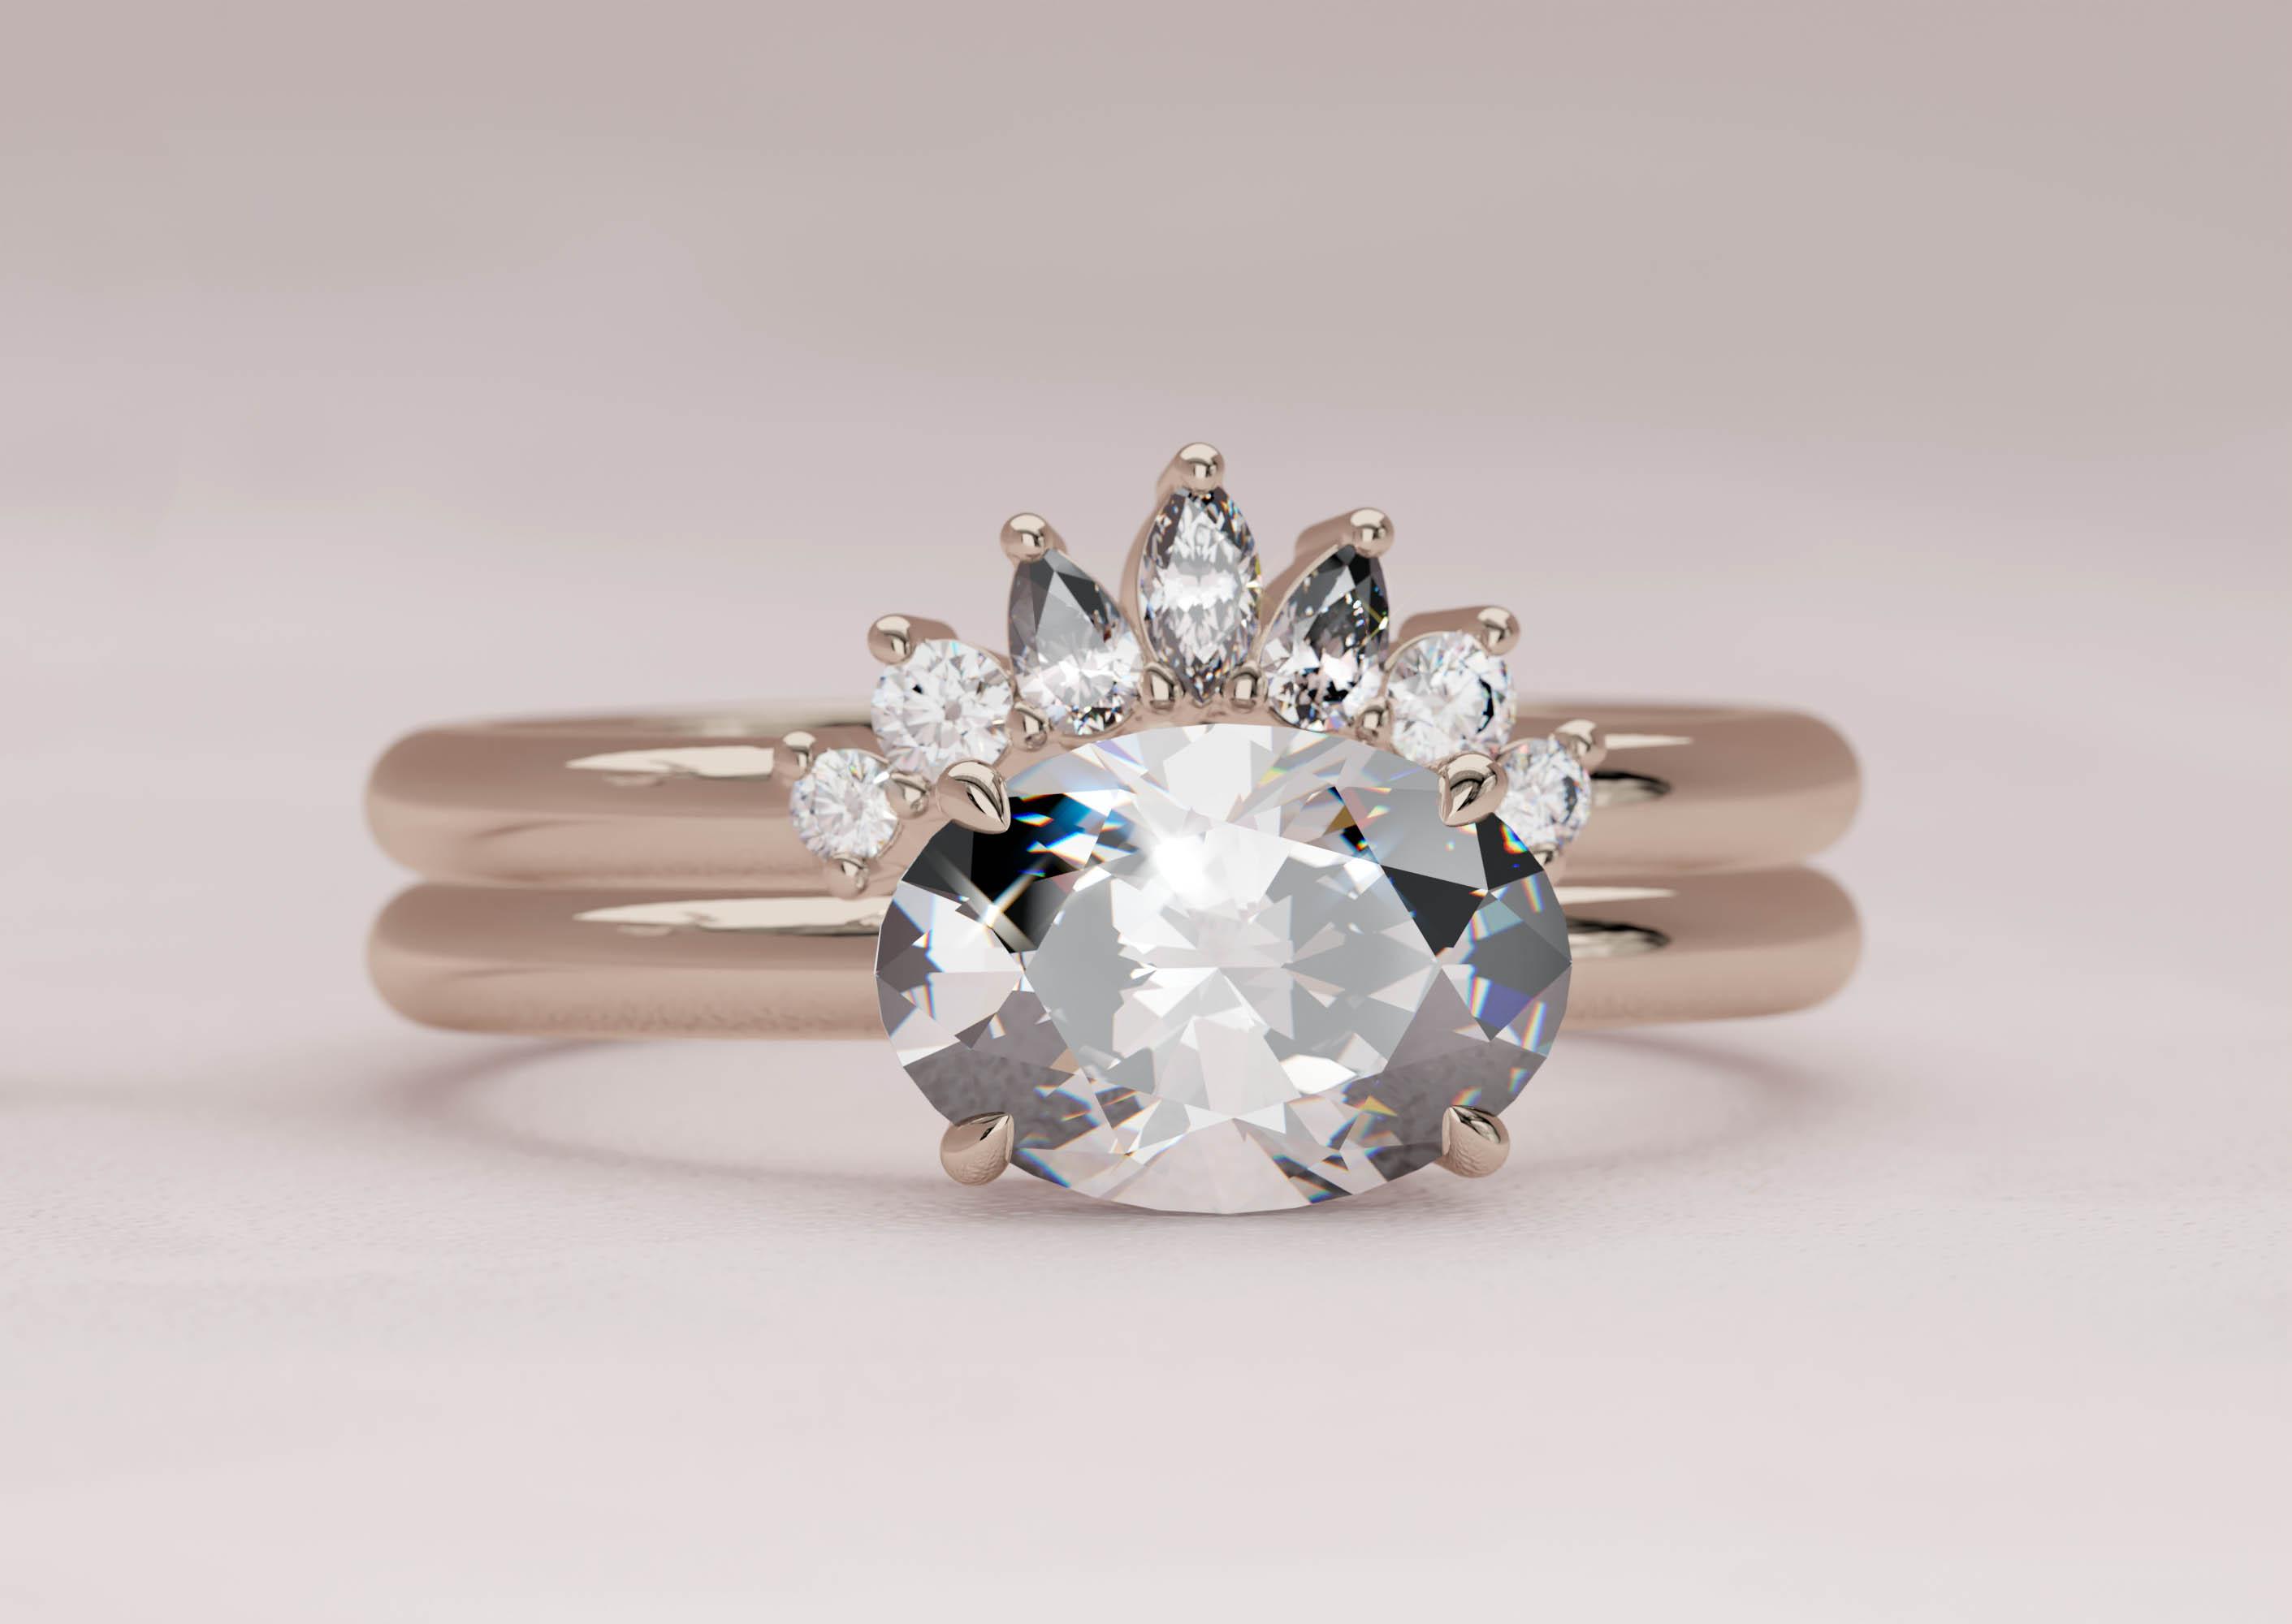 East-West Bridal Set featuring an 1.5 carat Oval Solitaire and a curved band featuring round and marquise diamonds